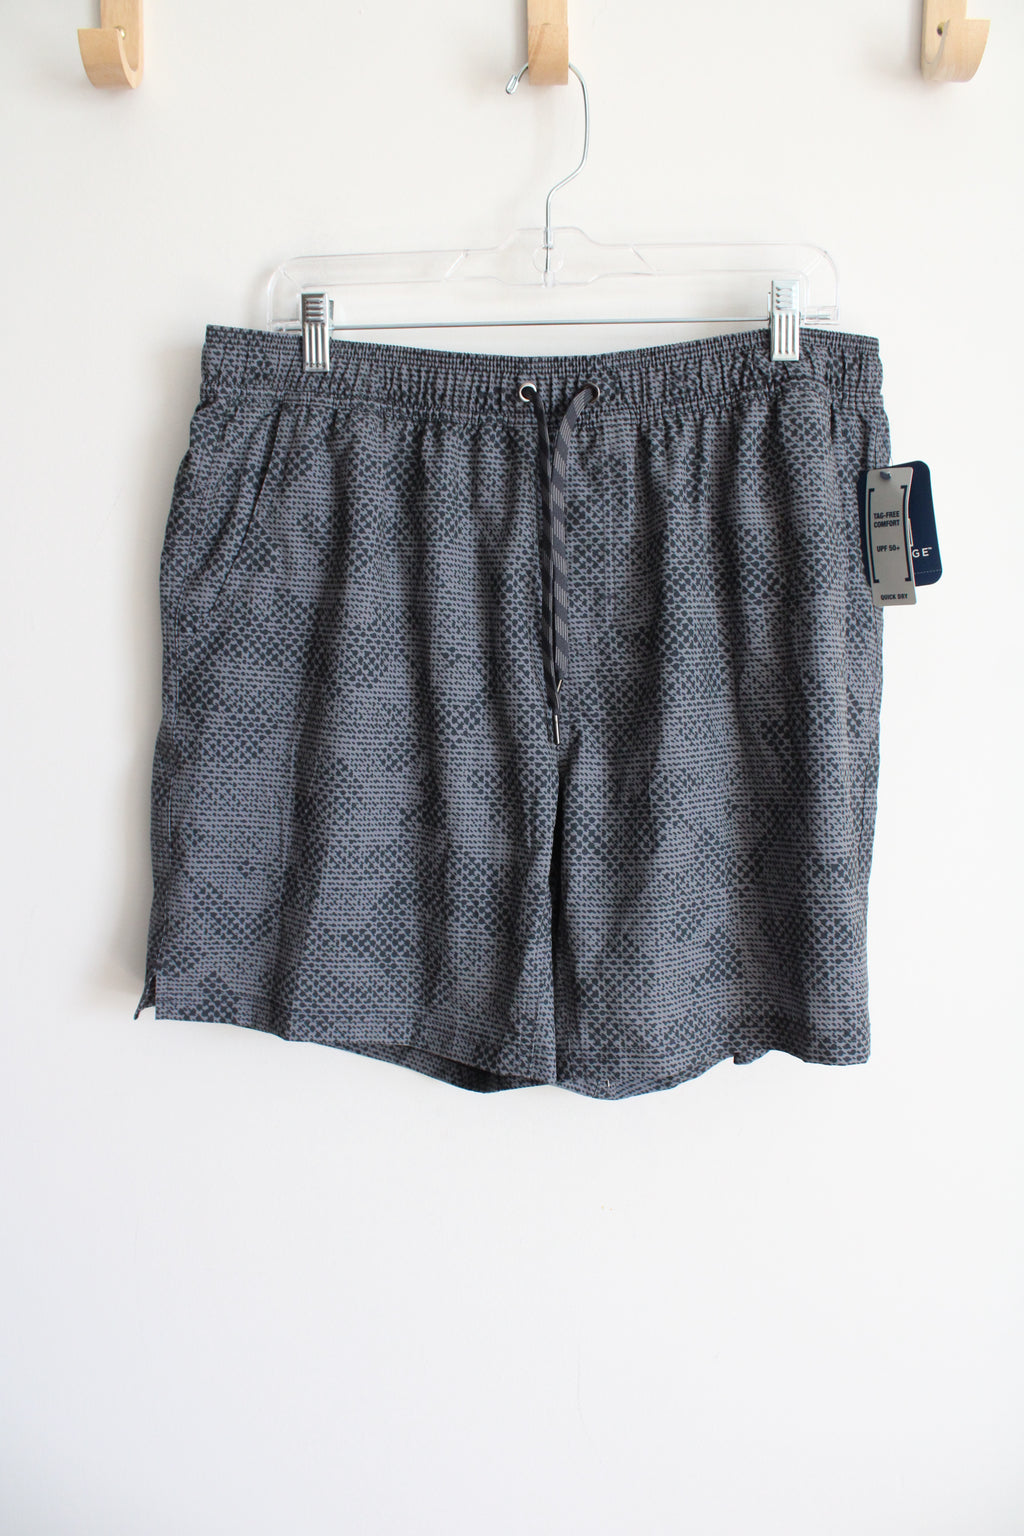 NEW George Gray Patterned Shorts | L